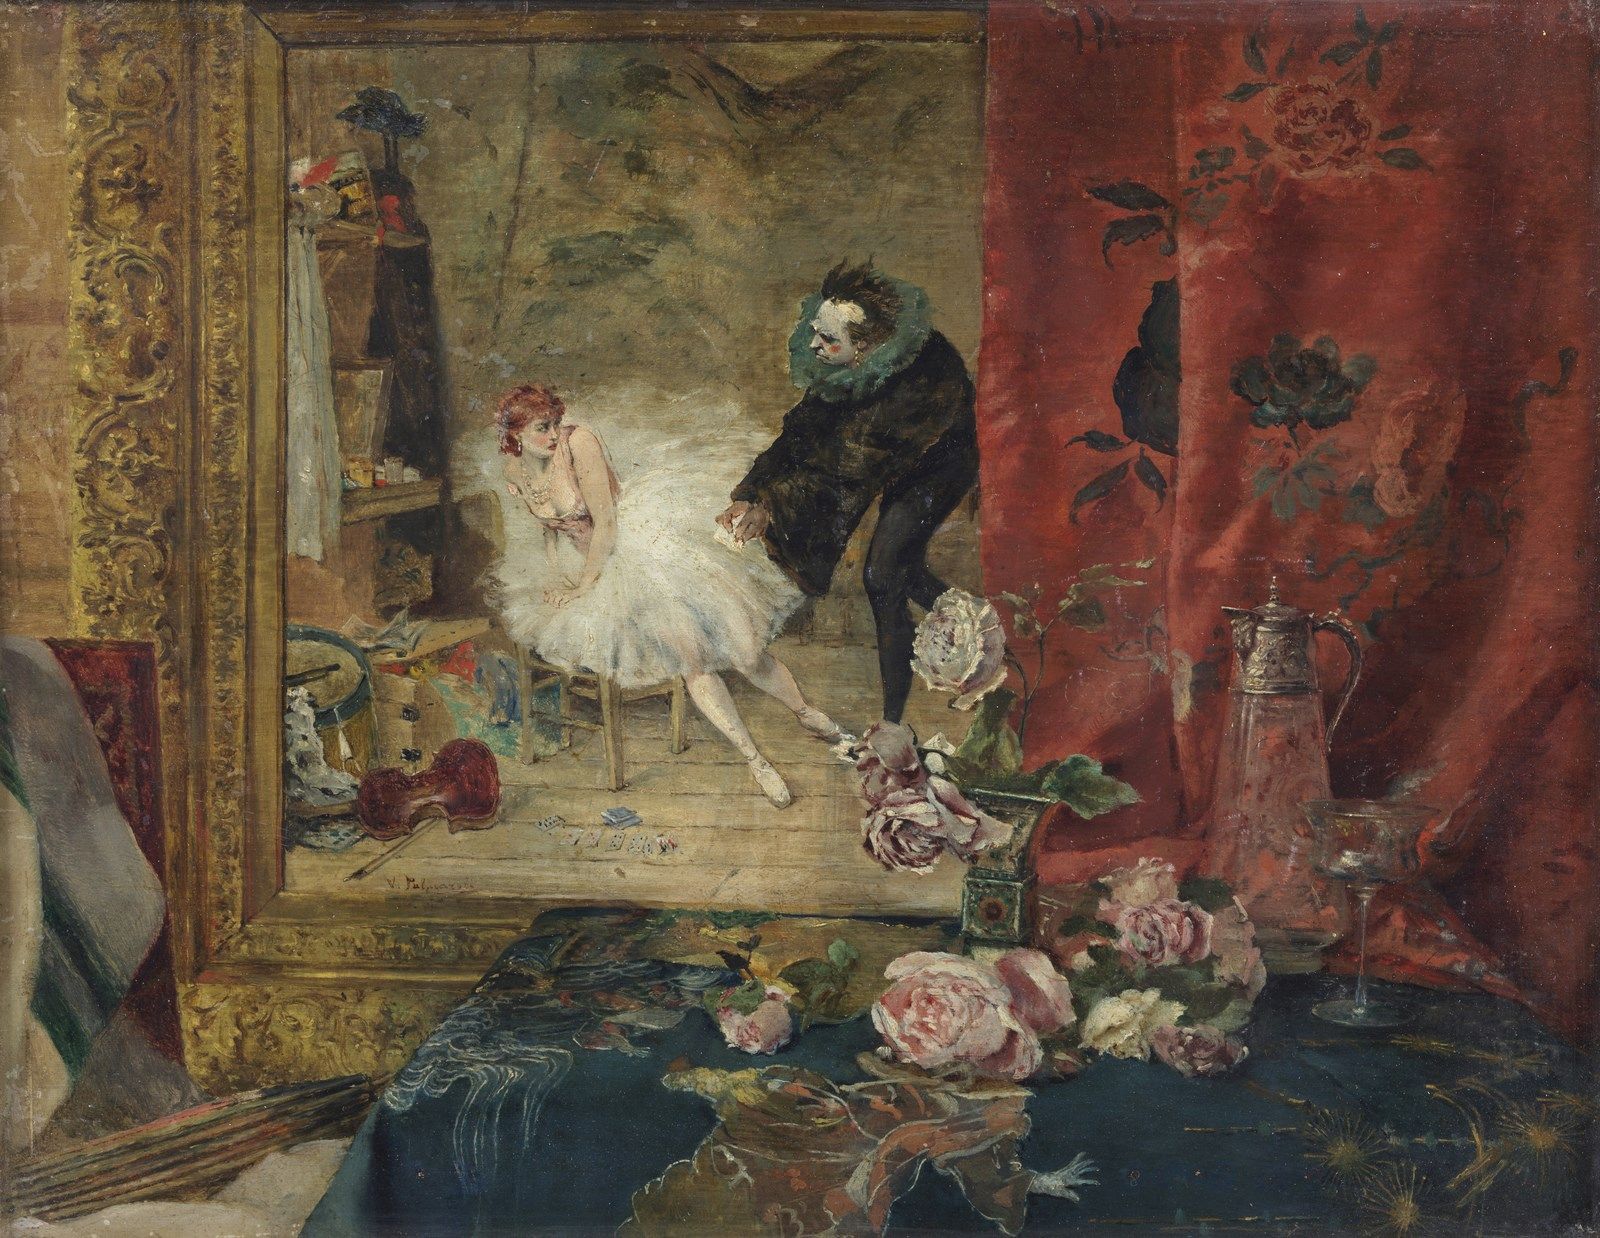 VICENTE PALMAROLI Y GONZALES The Clown and the dancer. The Clown and the dancer.&hellip;